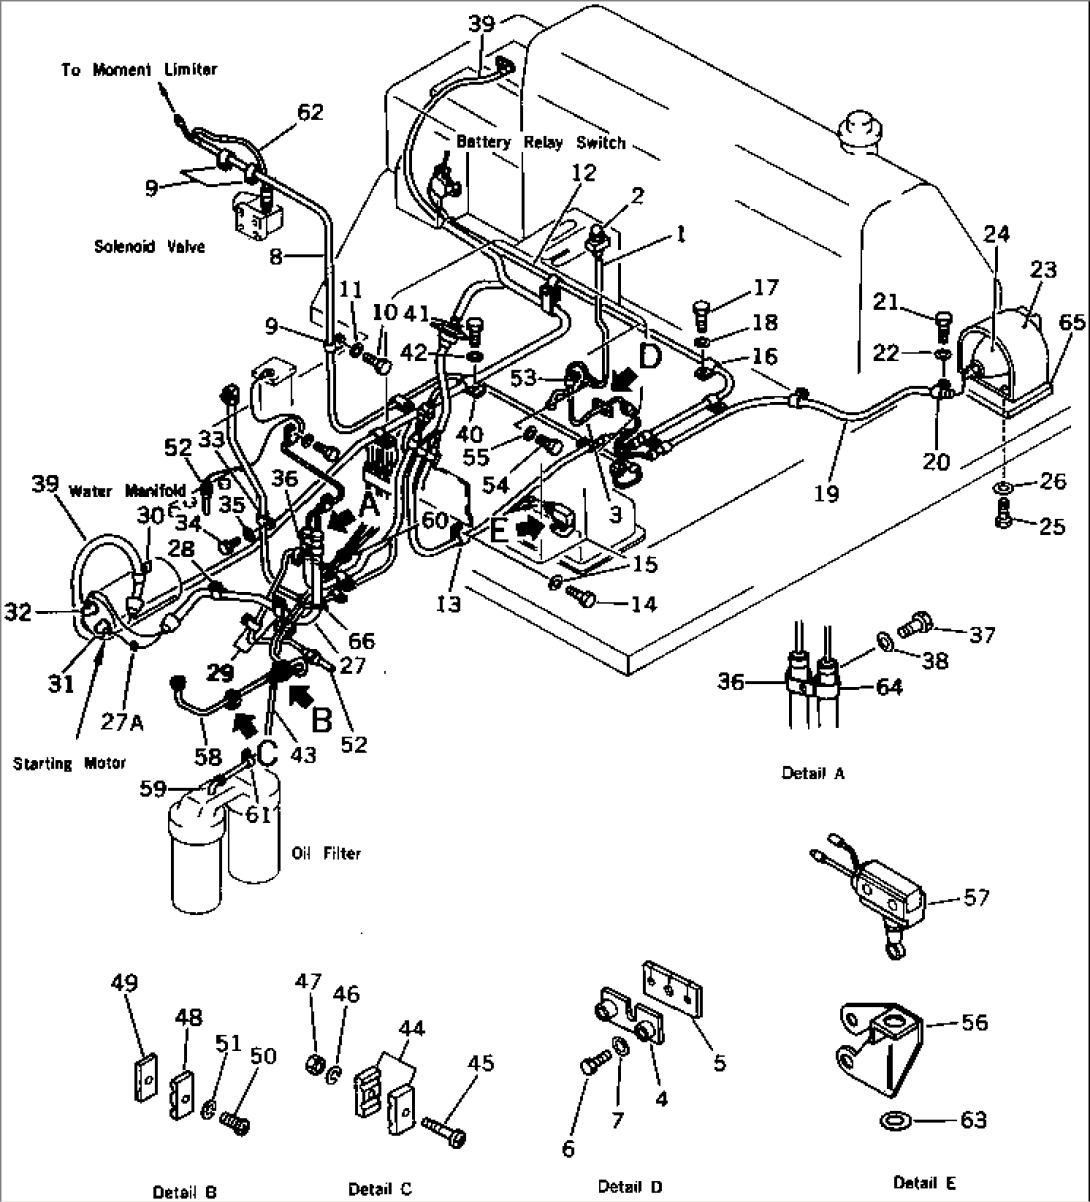 ELECTRICAL SYSTEM (1/3) (FOR ROCKET HEATER)(#12626-)